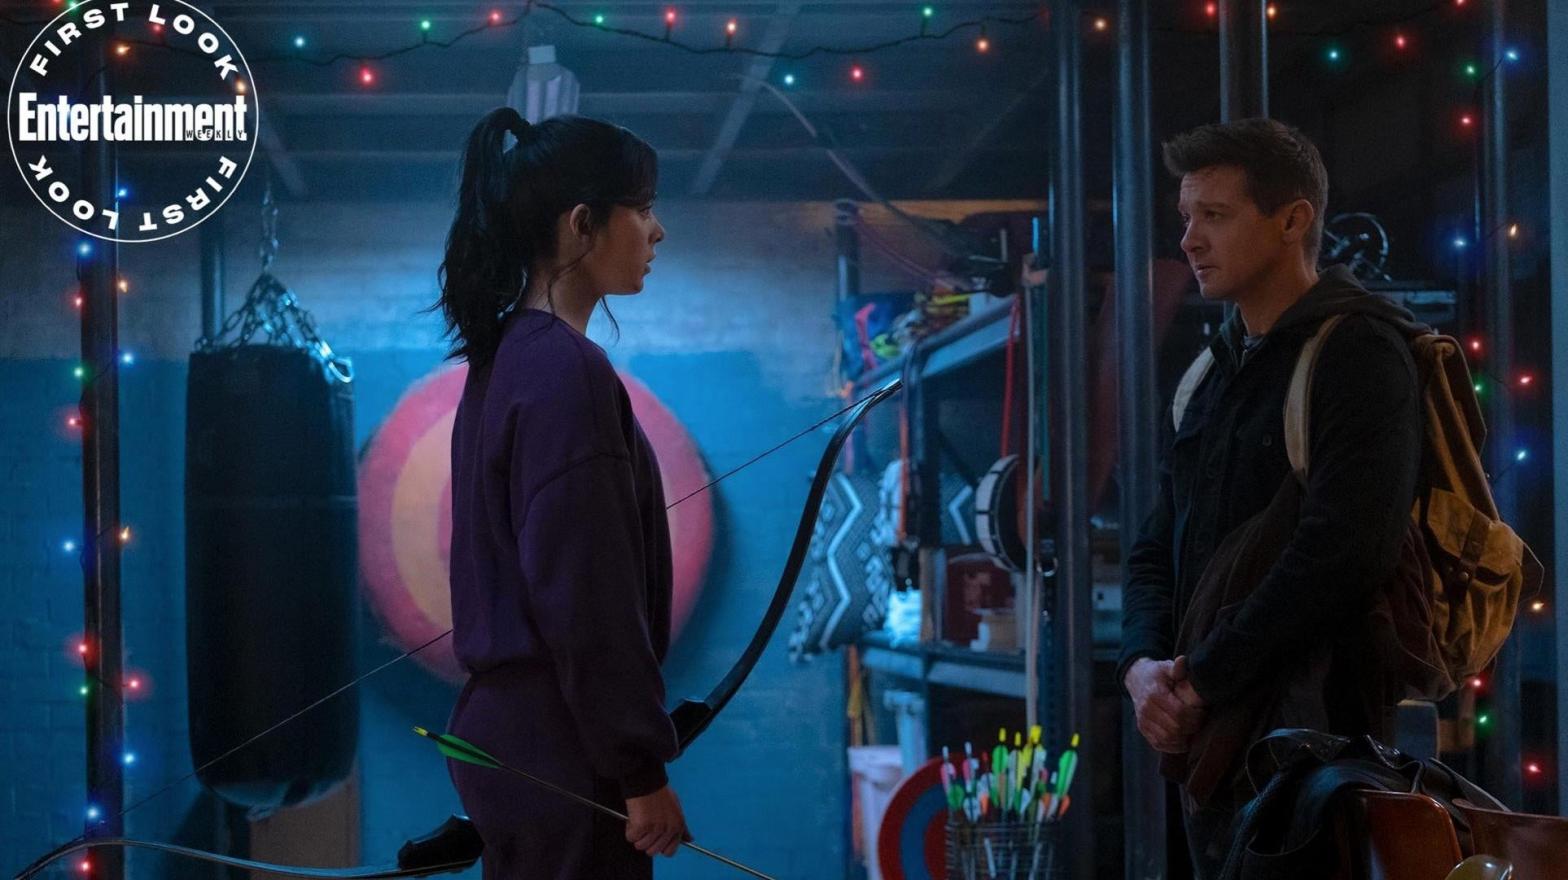 Hailee Steinfeld, Jeremy Renner, and a bunch of archery stuff in Hawkeye. (Photo: Entertainment Weekly/Marvel Studios)